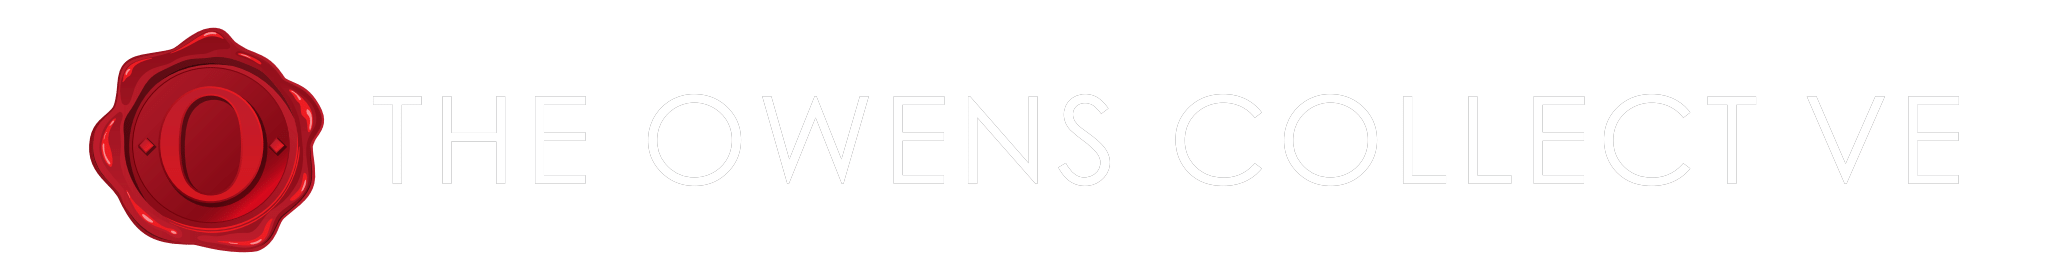 The Owens Collective | The Agency